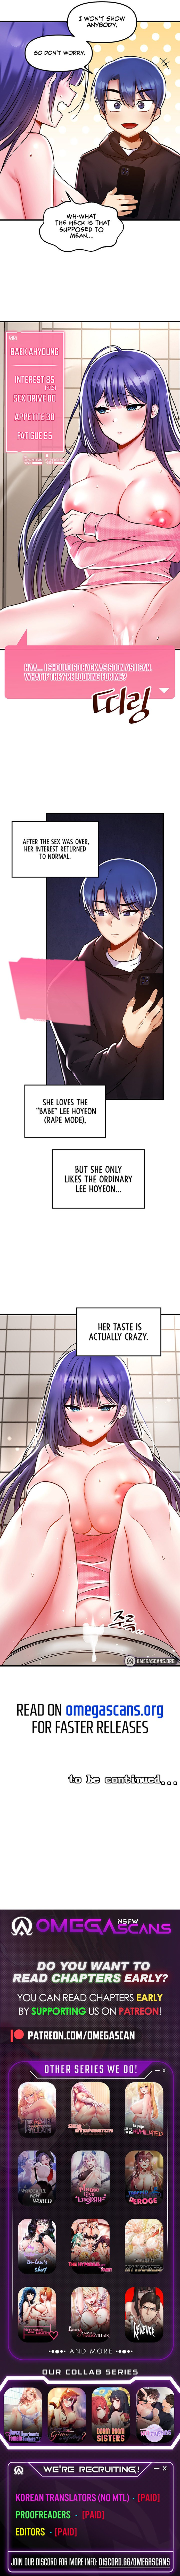 trapped-in-the-academys-eroge-chap-39-6